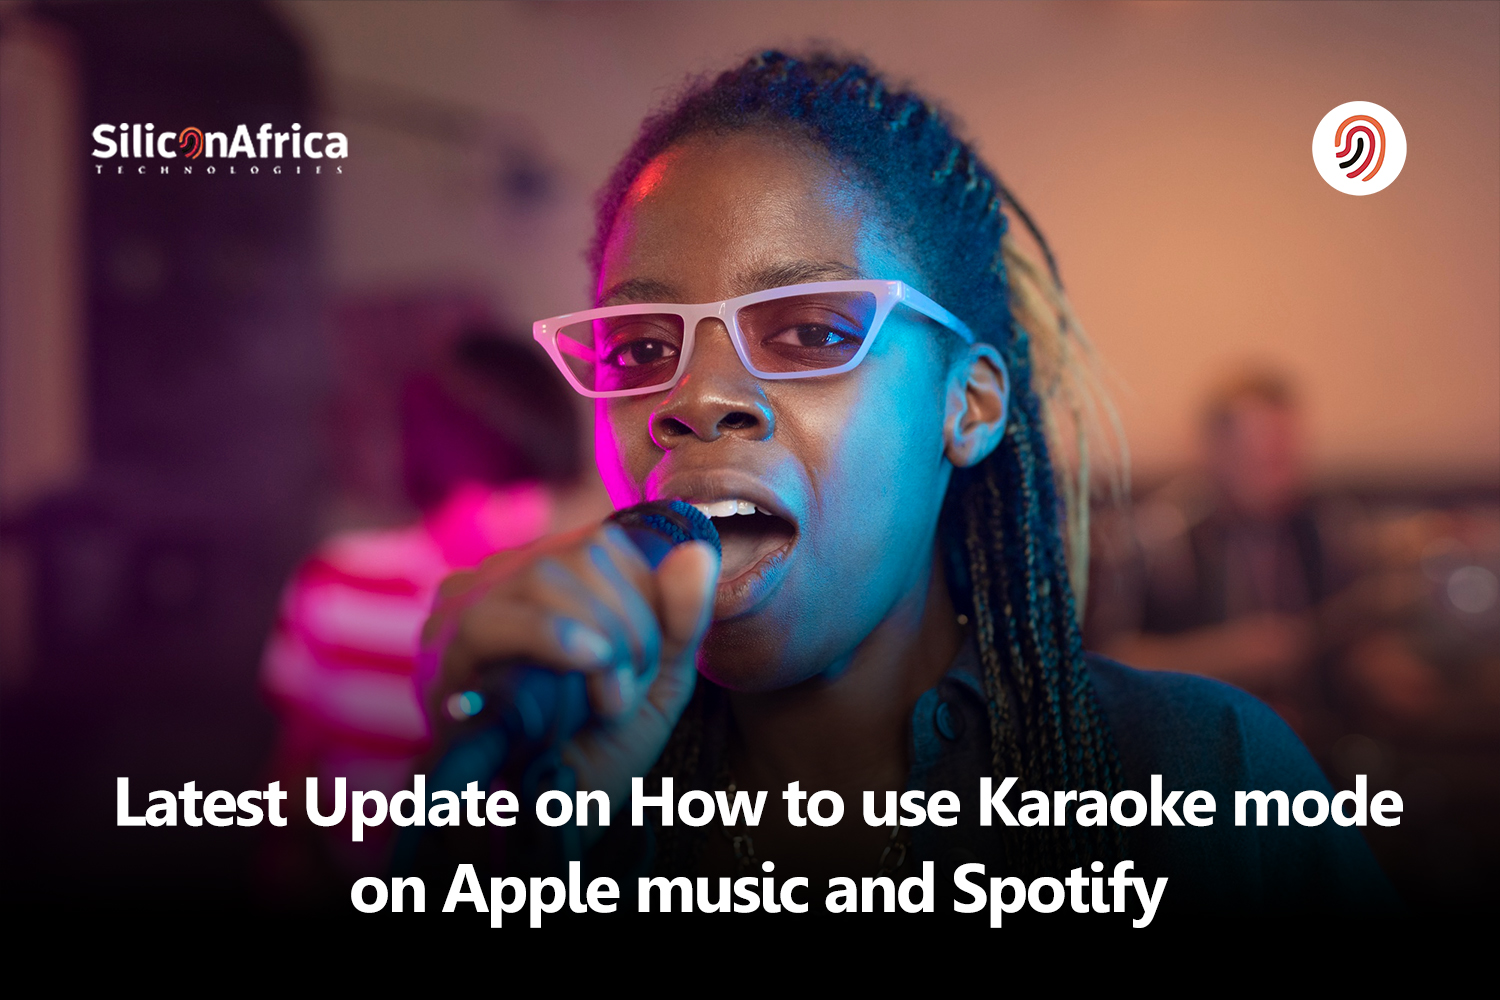 Latest Update on How to Use Karaoke Mode on Apple Music and Spotify